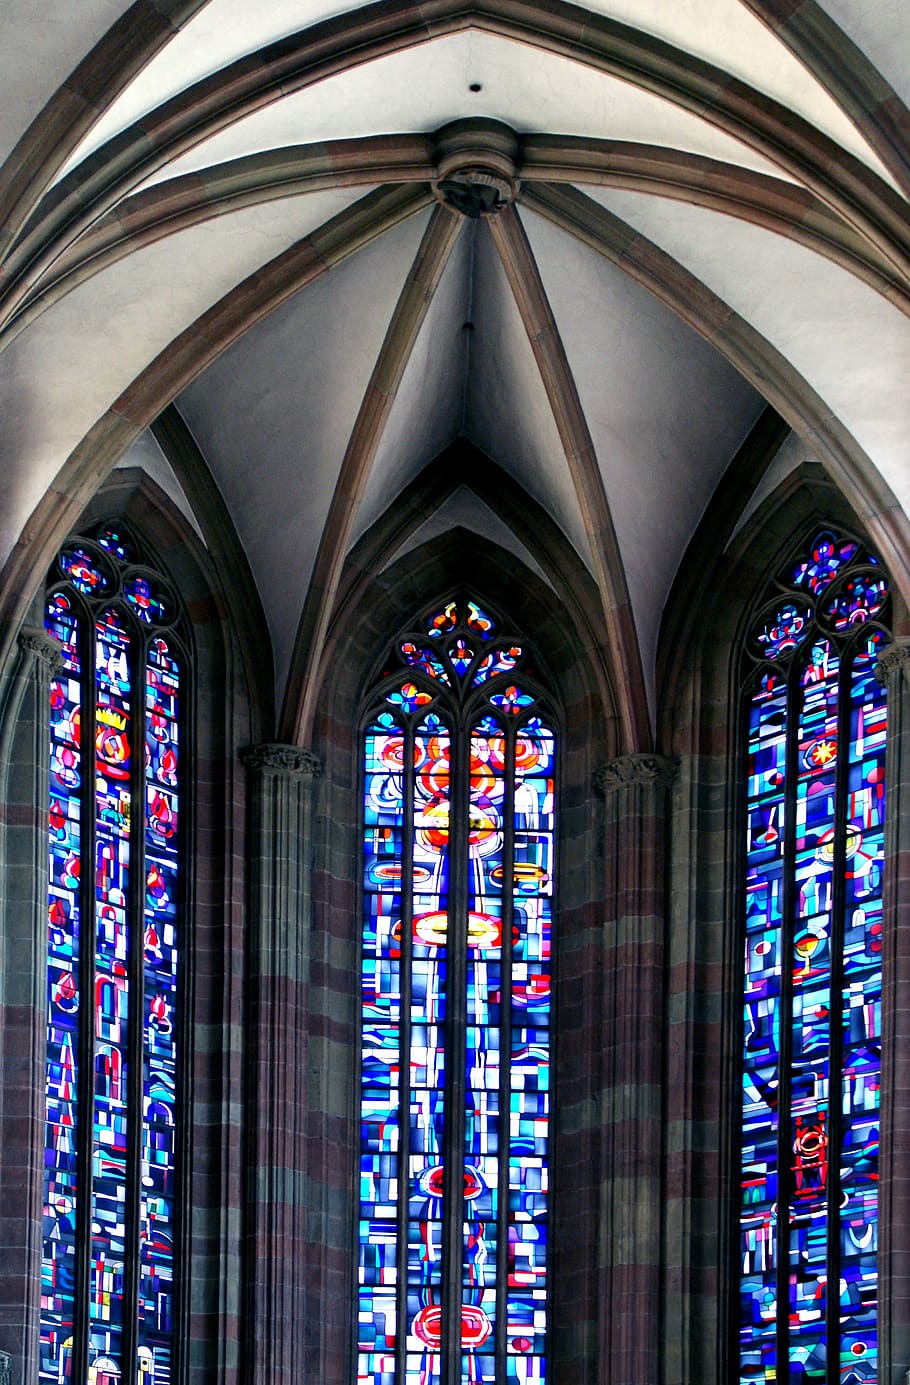 Window, Church, Colorful, Leaded Glass, stained glass, old, germany, glass, gothic, vault